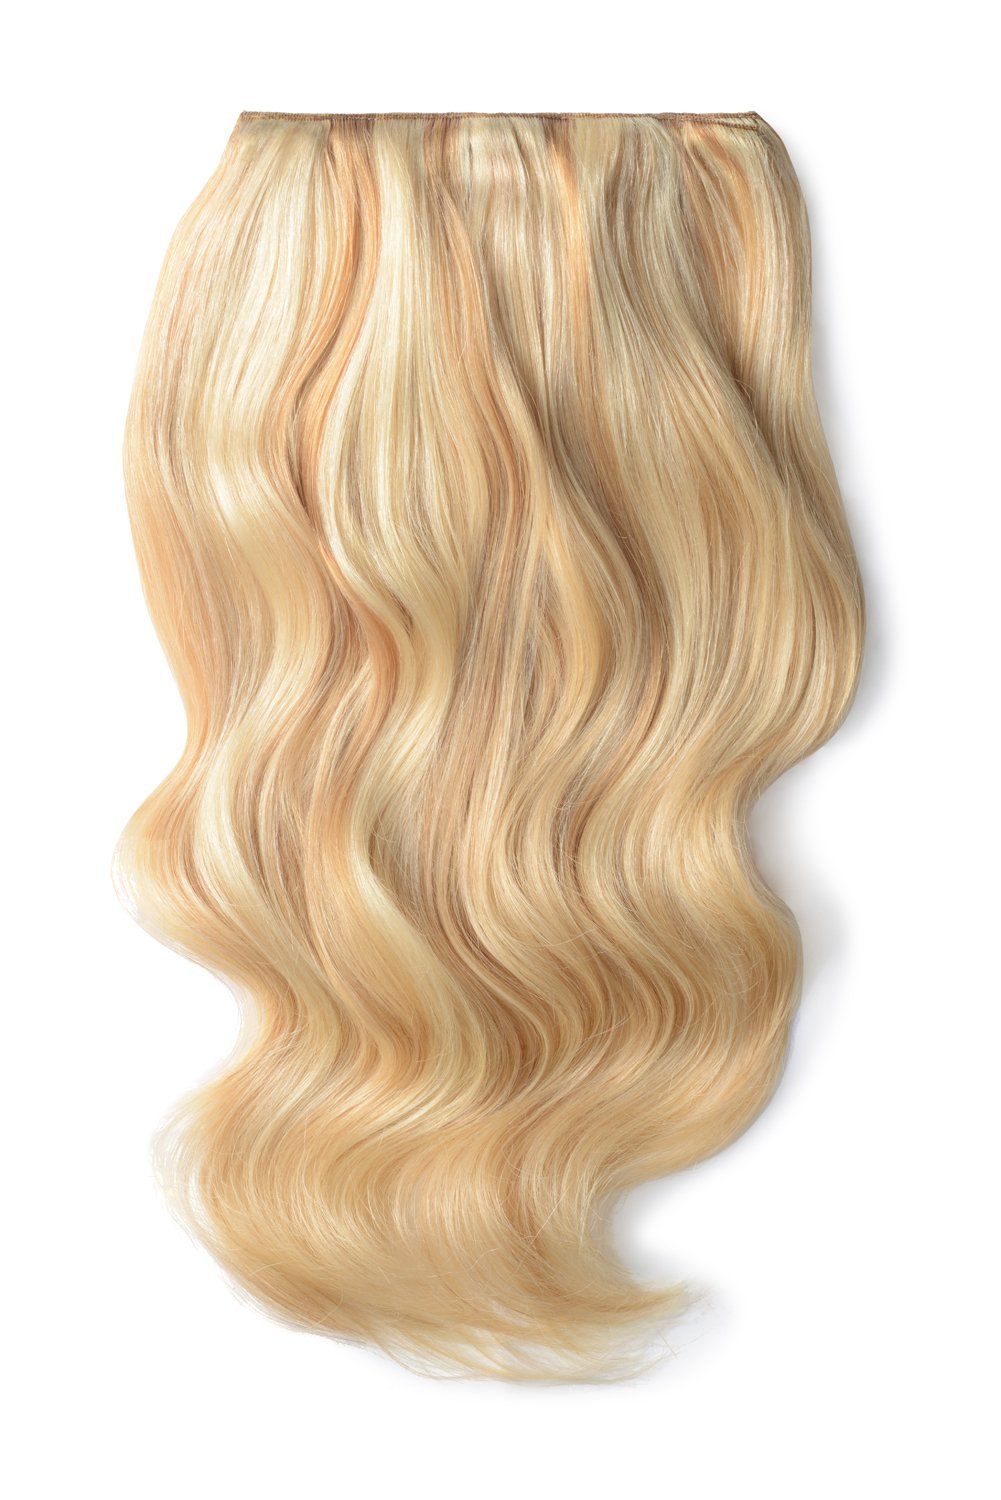 Double Wefted Full Head Remy Clip in Human Hair Extensions - Strawberry Blonde/Bleach Blonde Mix (#27/613)